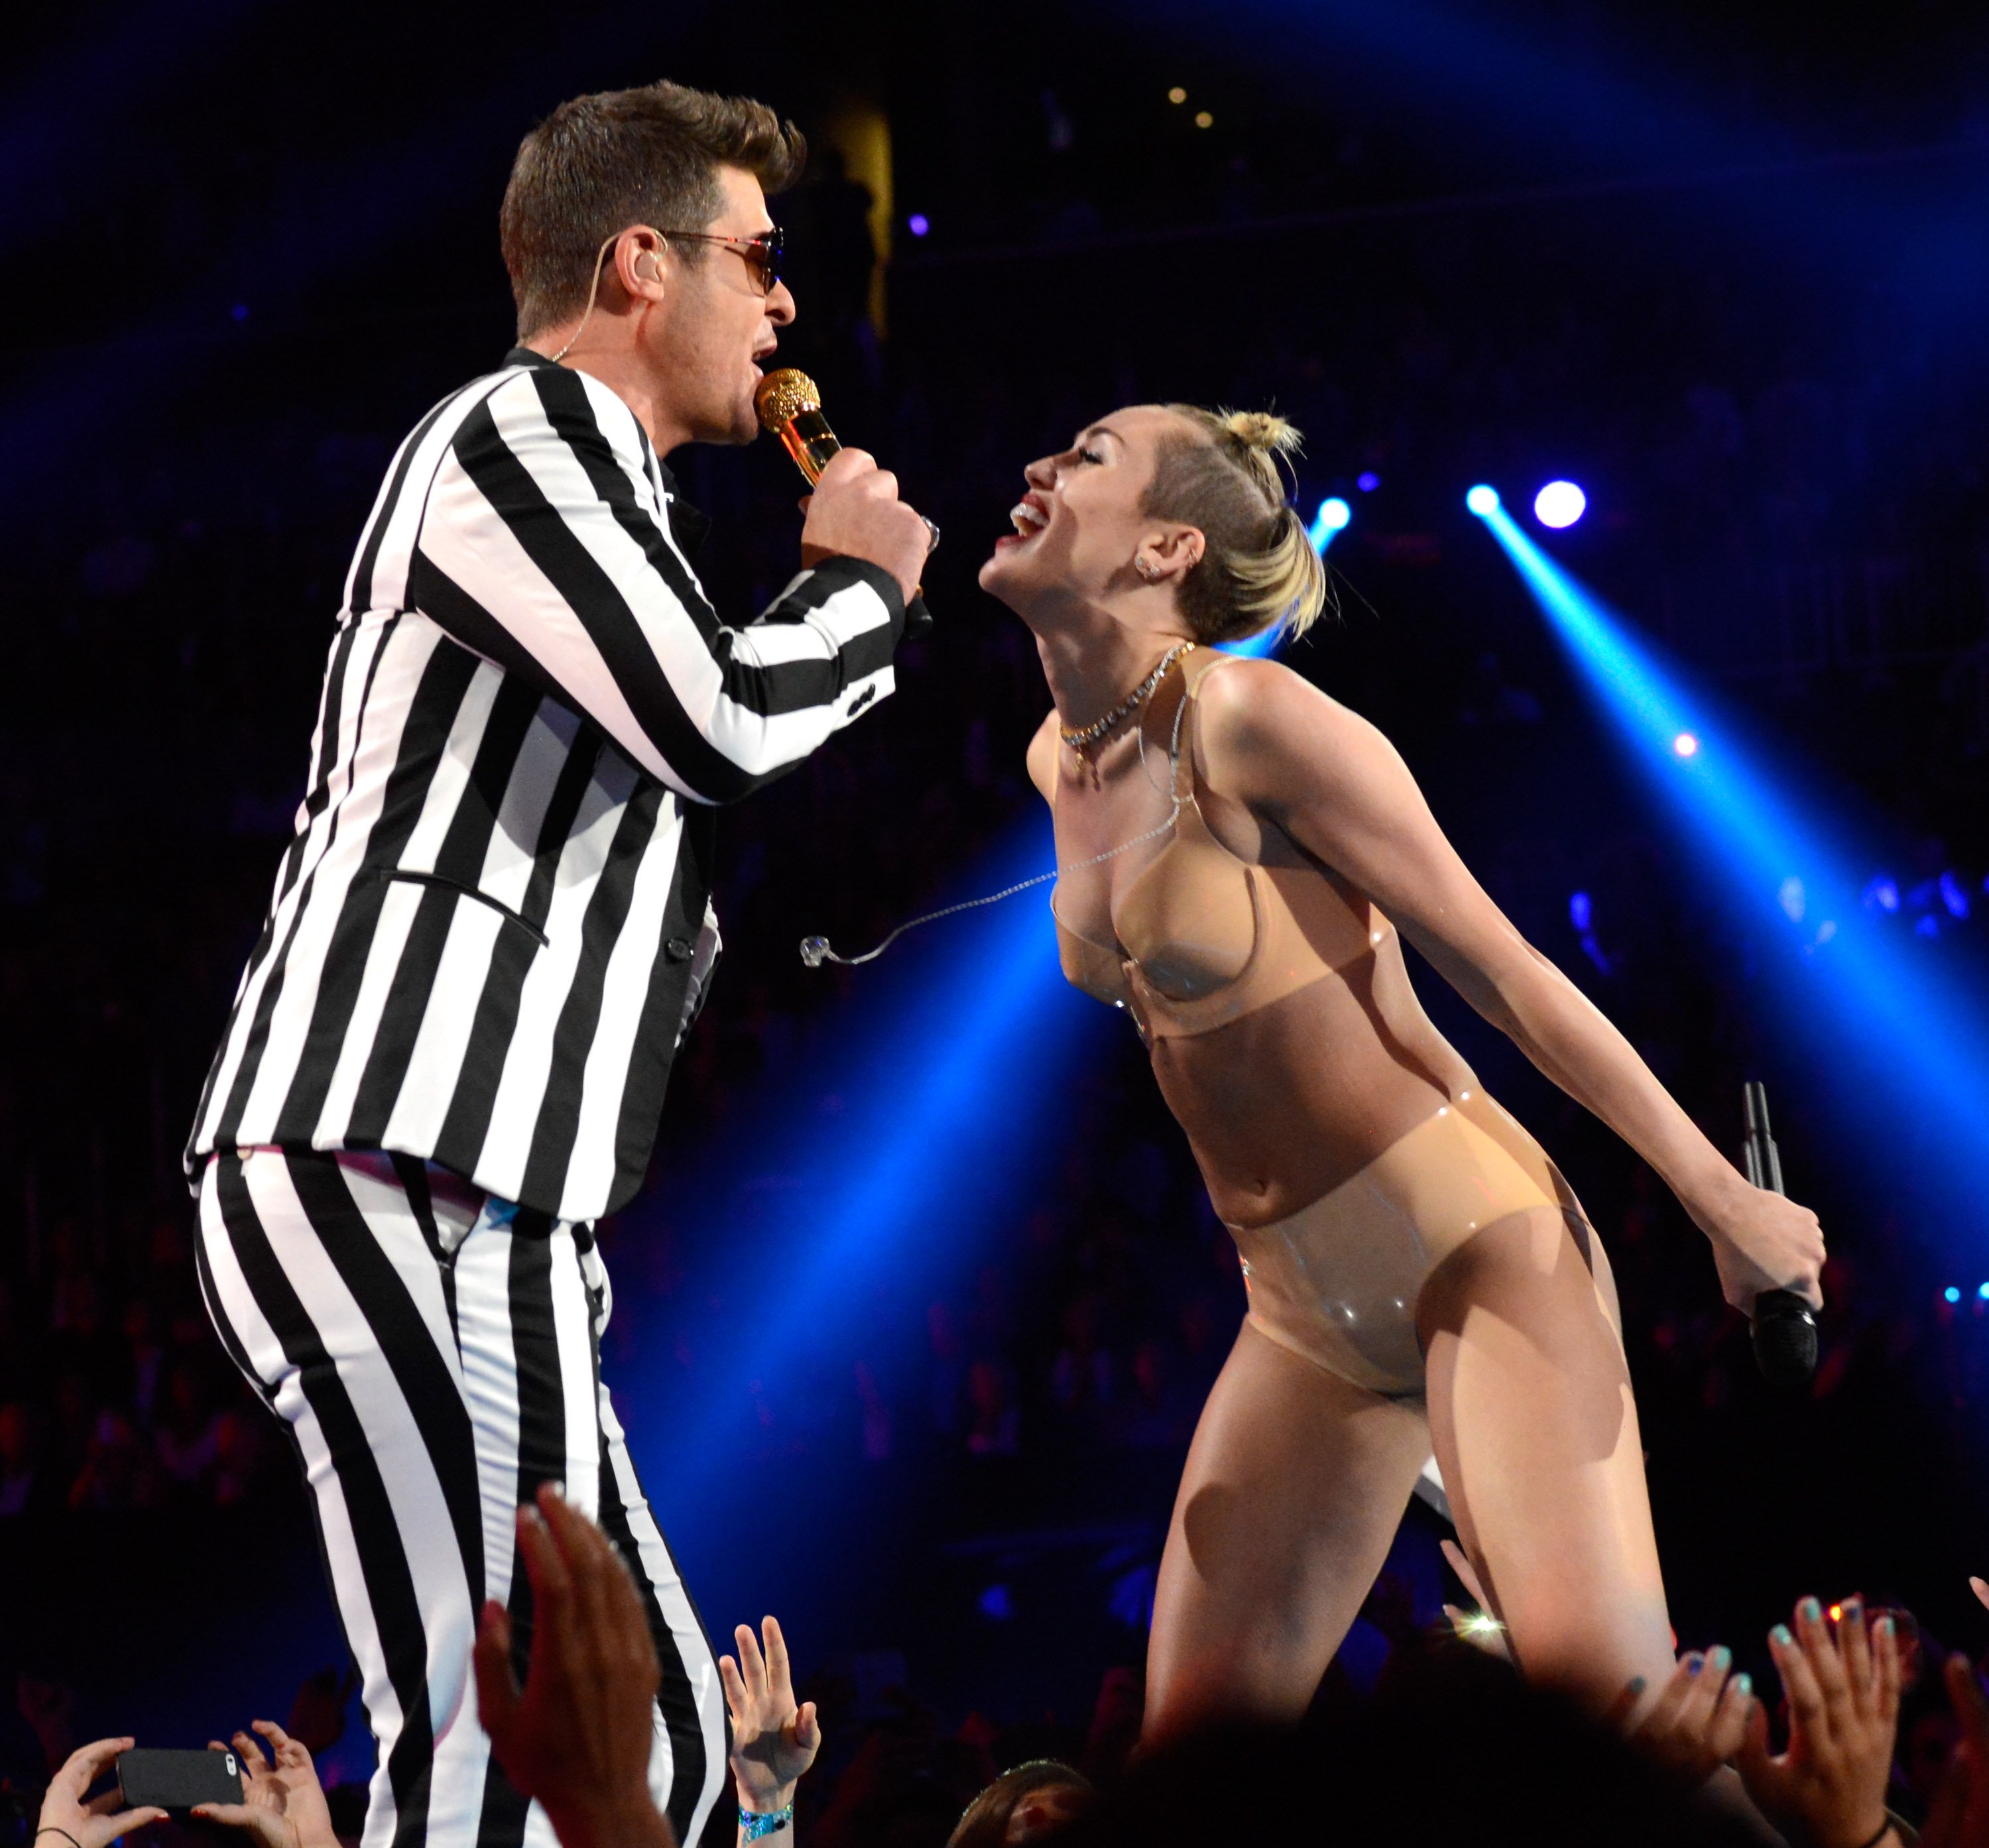 Robin Thicke and Miley Cyrus singing at each other